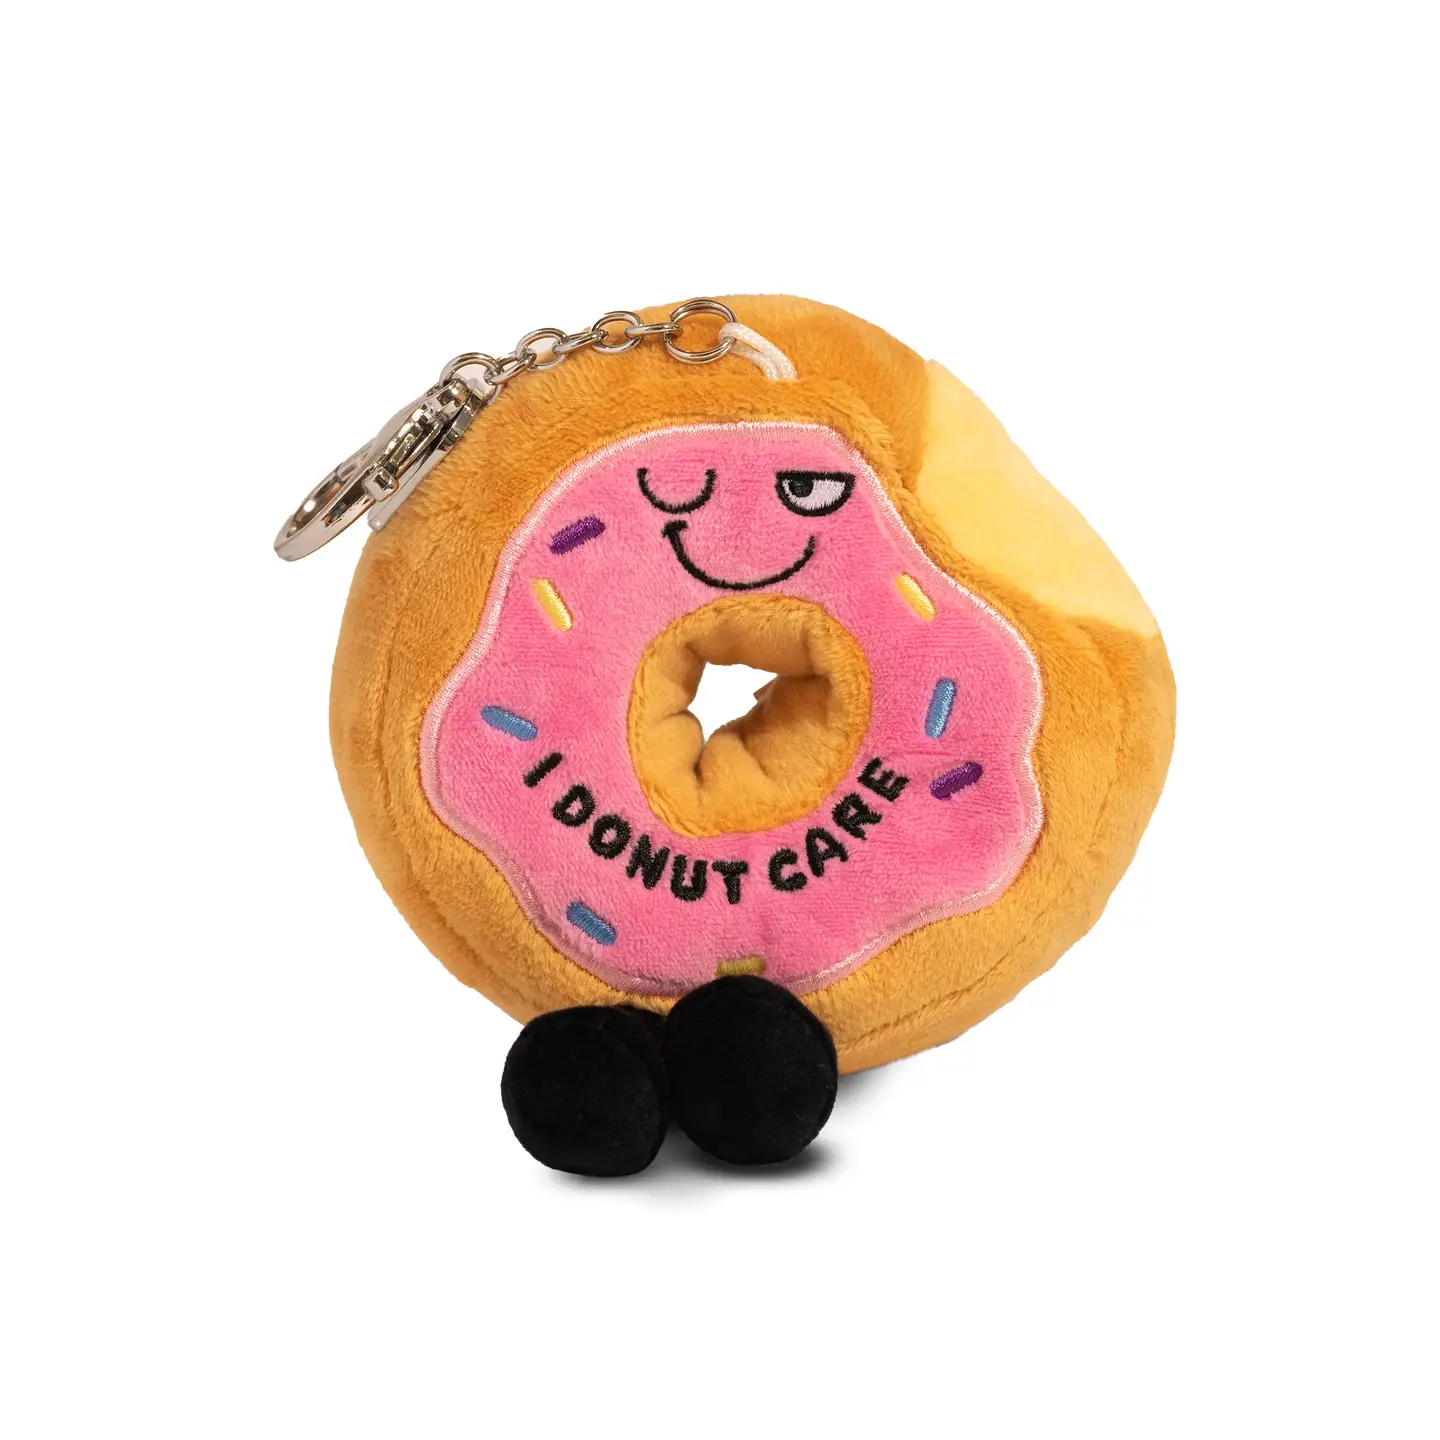 This is one sassy bag charm. We donut need to tell you that he doesn’t care about your opinion a hole lot. However, his sassy wink, colorful sprinkle details, and dangly legs make him a-dough-able. This bite-sized plush would look super cute hanging from any backpack or purse.